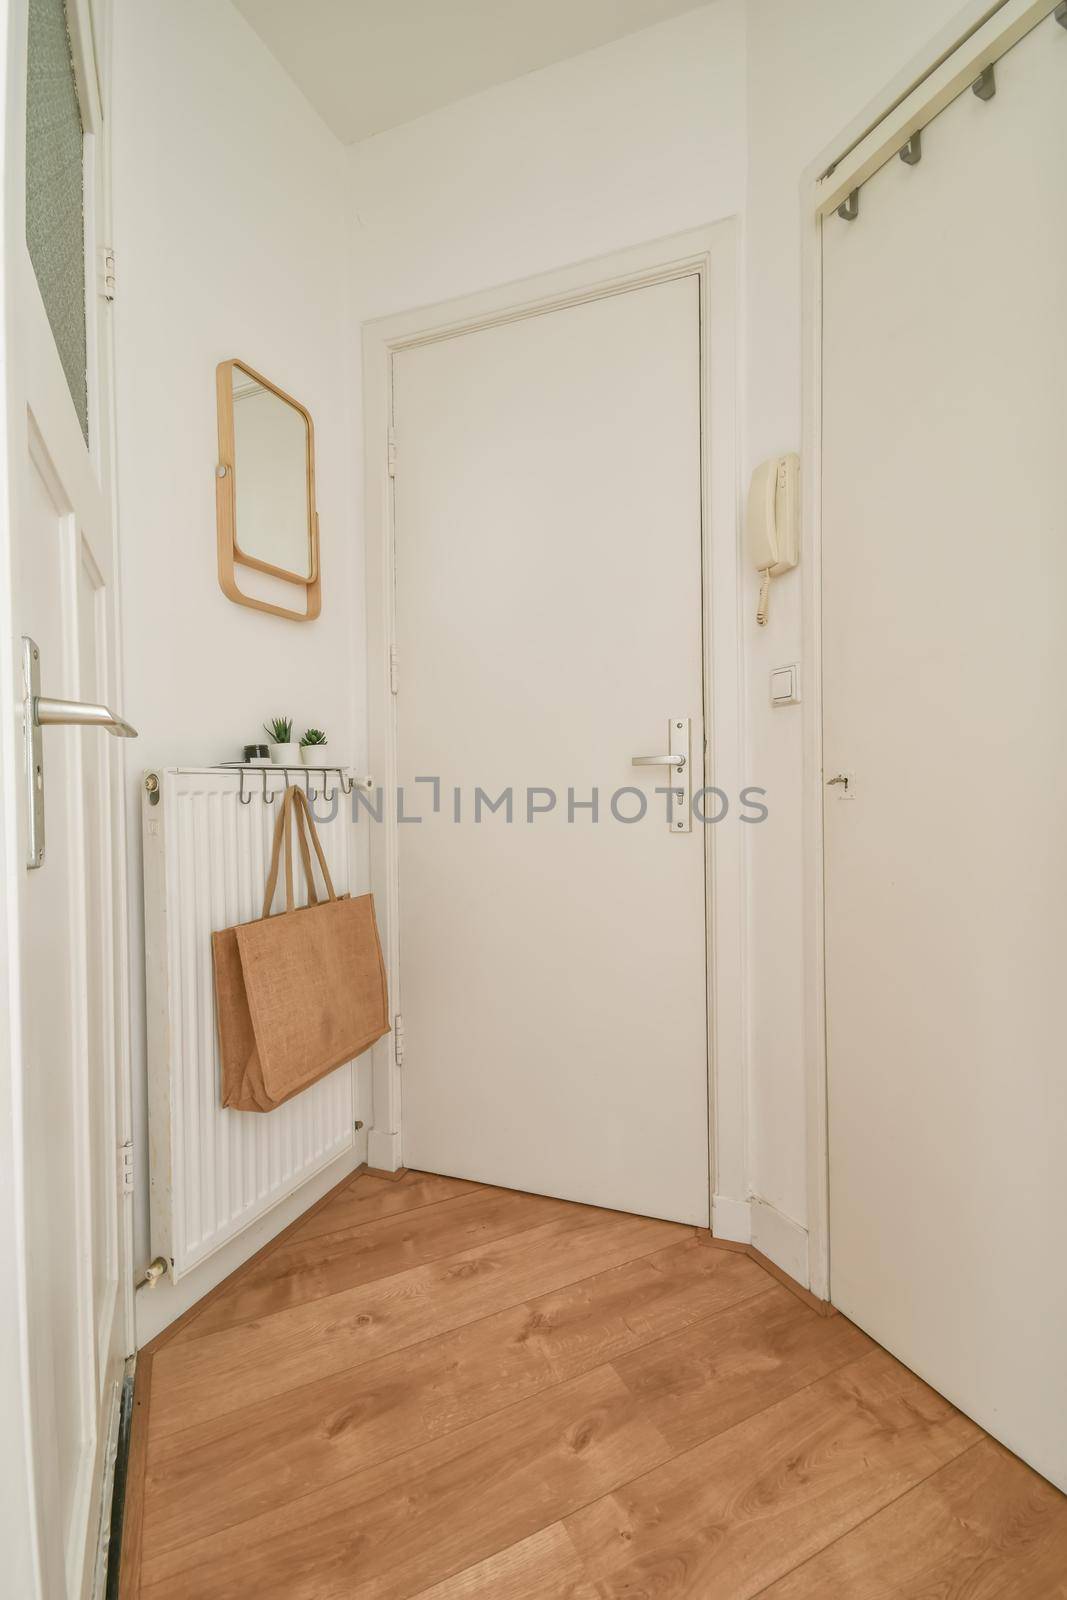 The entrance to the spacious apartment is through the corridor of a modern house